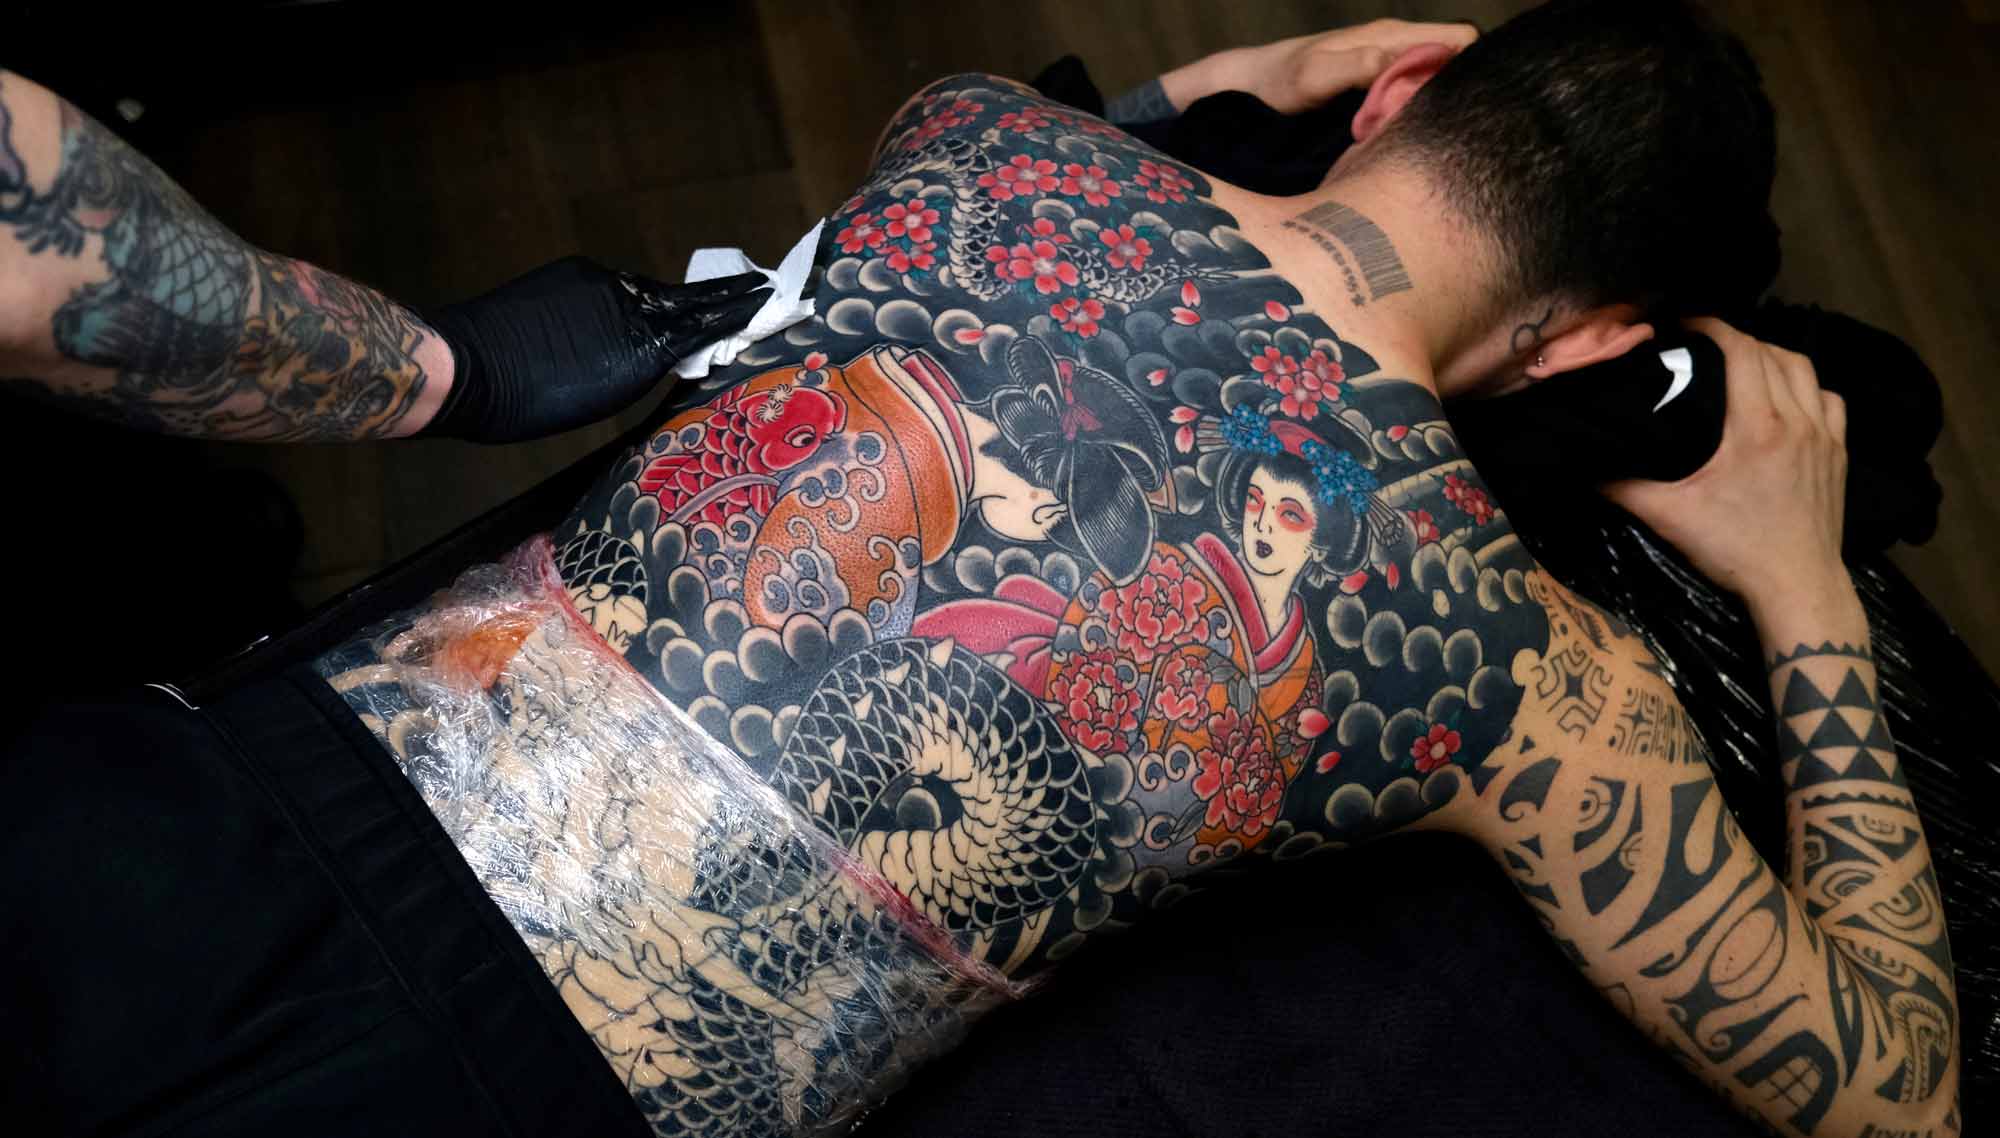 Cover tattoo: how to cover up an old tattoo